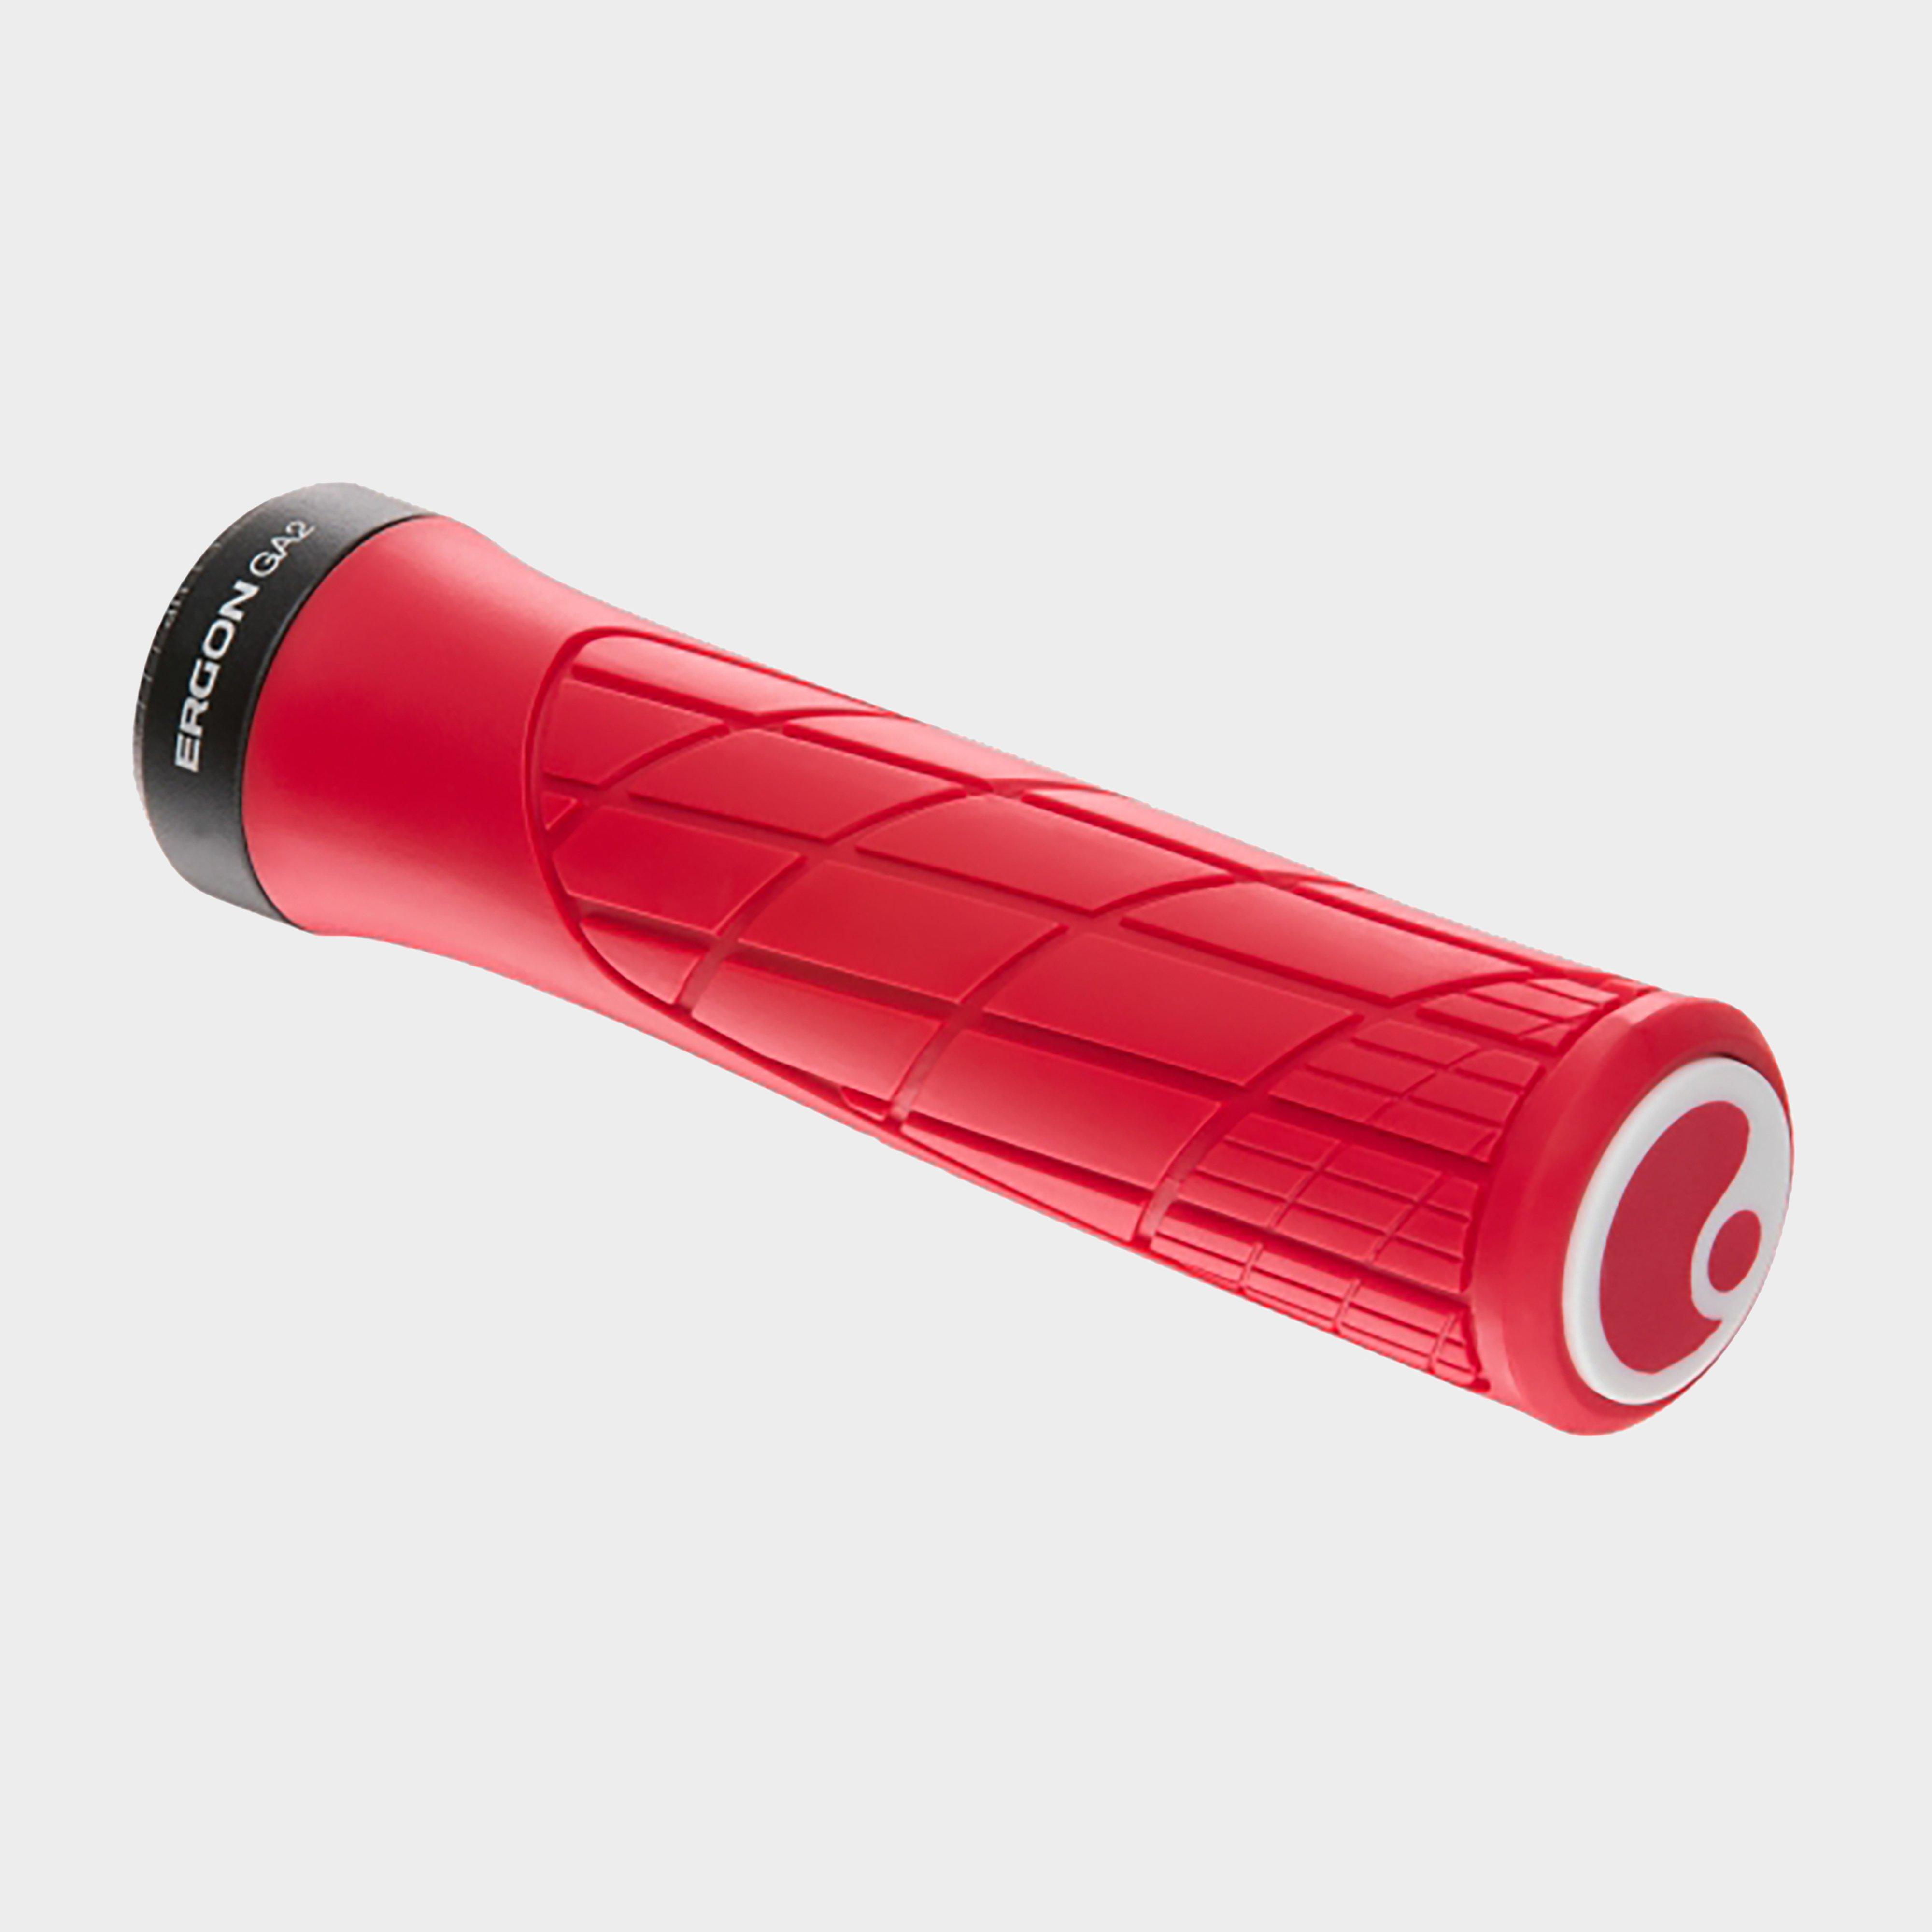 Ergon Ga2 Grips - Red/red  Red/red